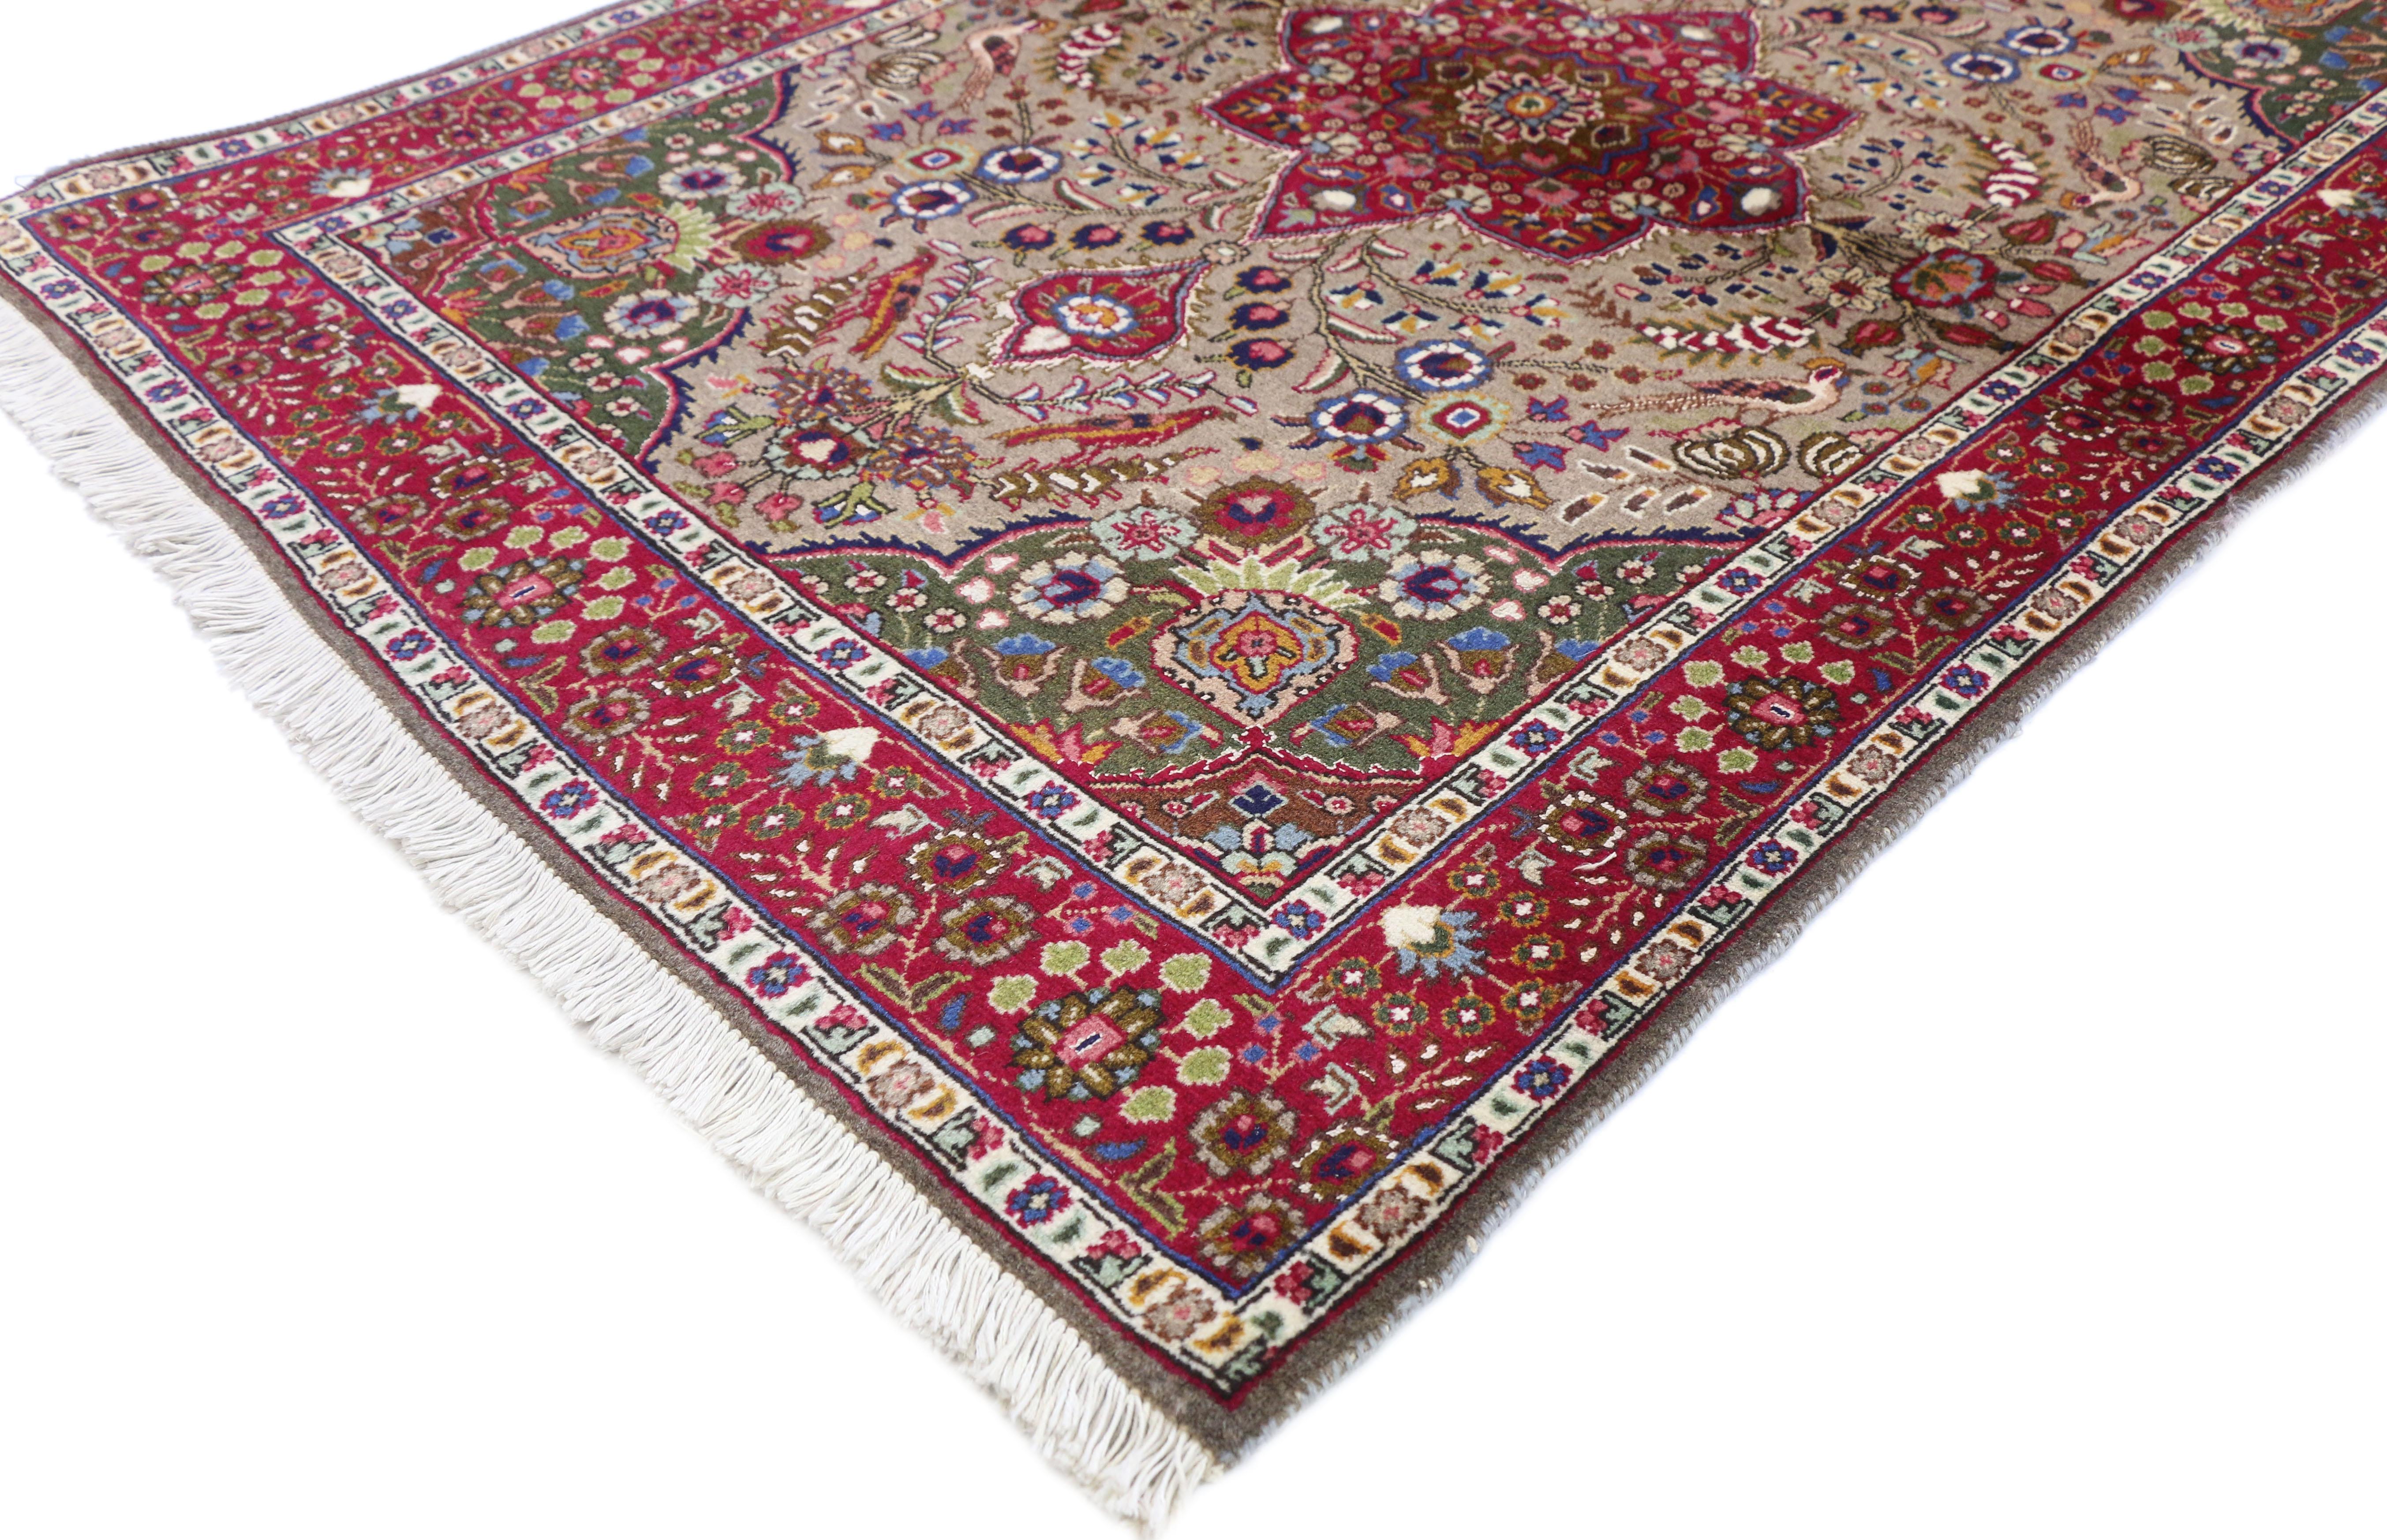 74690, Vintage Persian Tabriz Medallion Rug with Rustic Feminine Arts & Crafts Style. With a rustic feminine and Arts & Craft Style, this hand-knotted wool Persian Tabriz rug features a central red star medallion enhanced with geometric floral